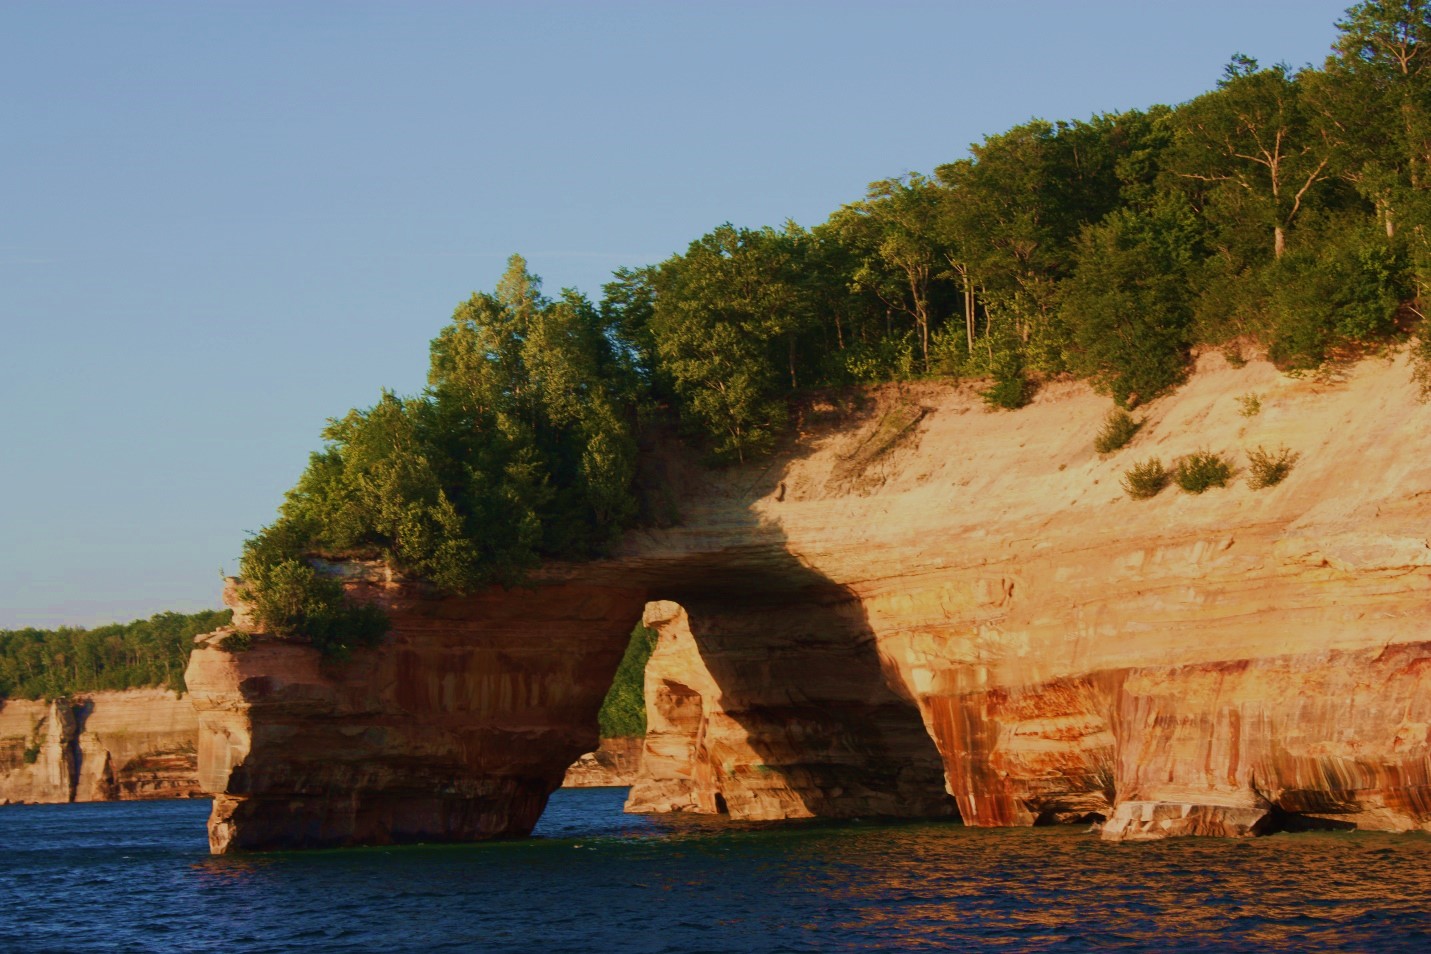 Lover’s Leap, a famous archway in the Pictured Rocks.